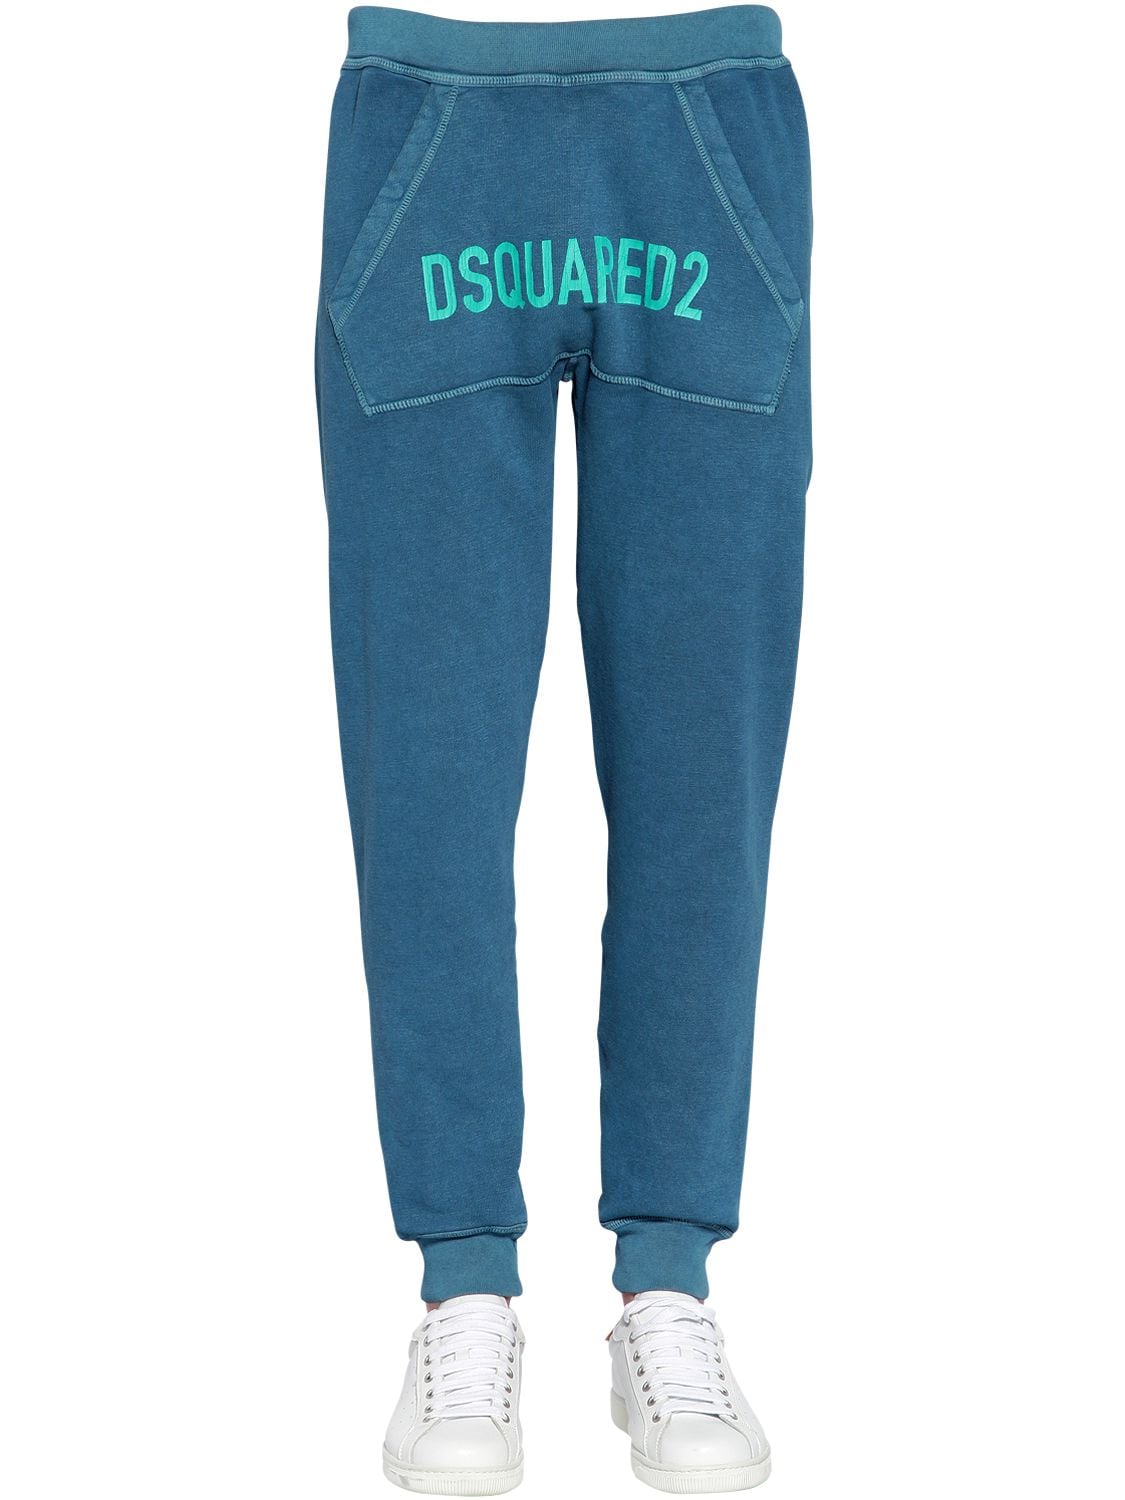 Dsquared2 Printed Cotton Jersey Sweatpants In Petrol